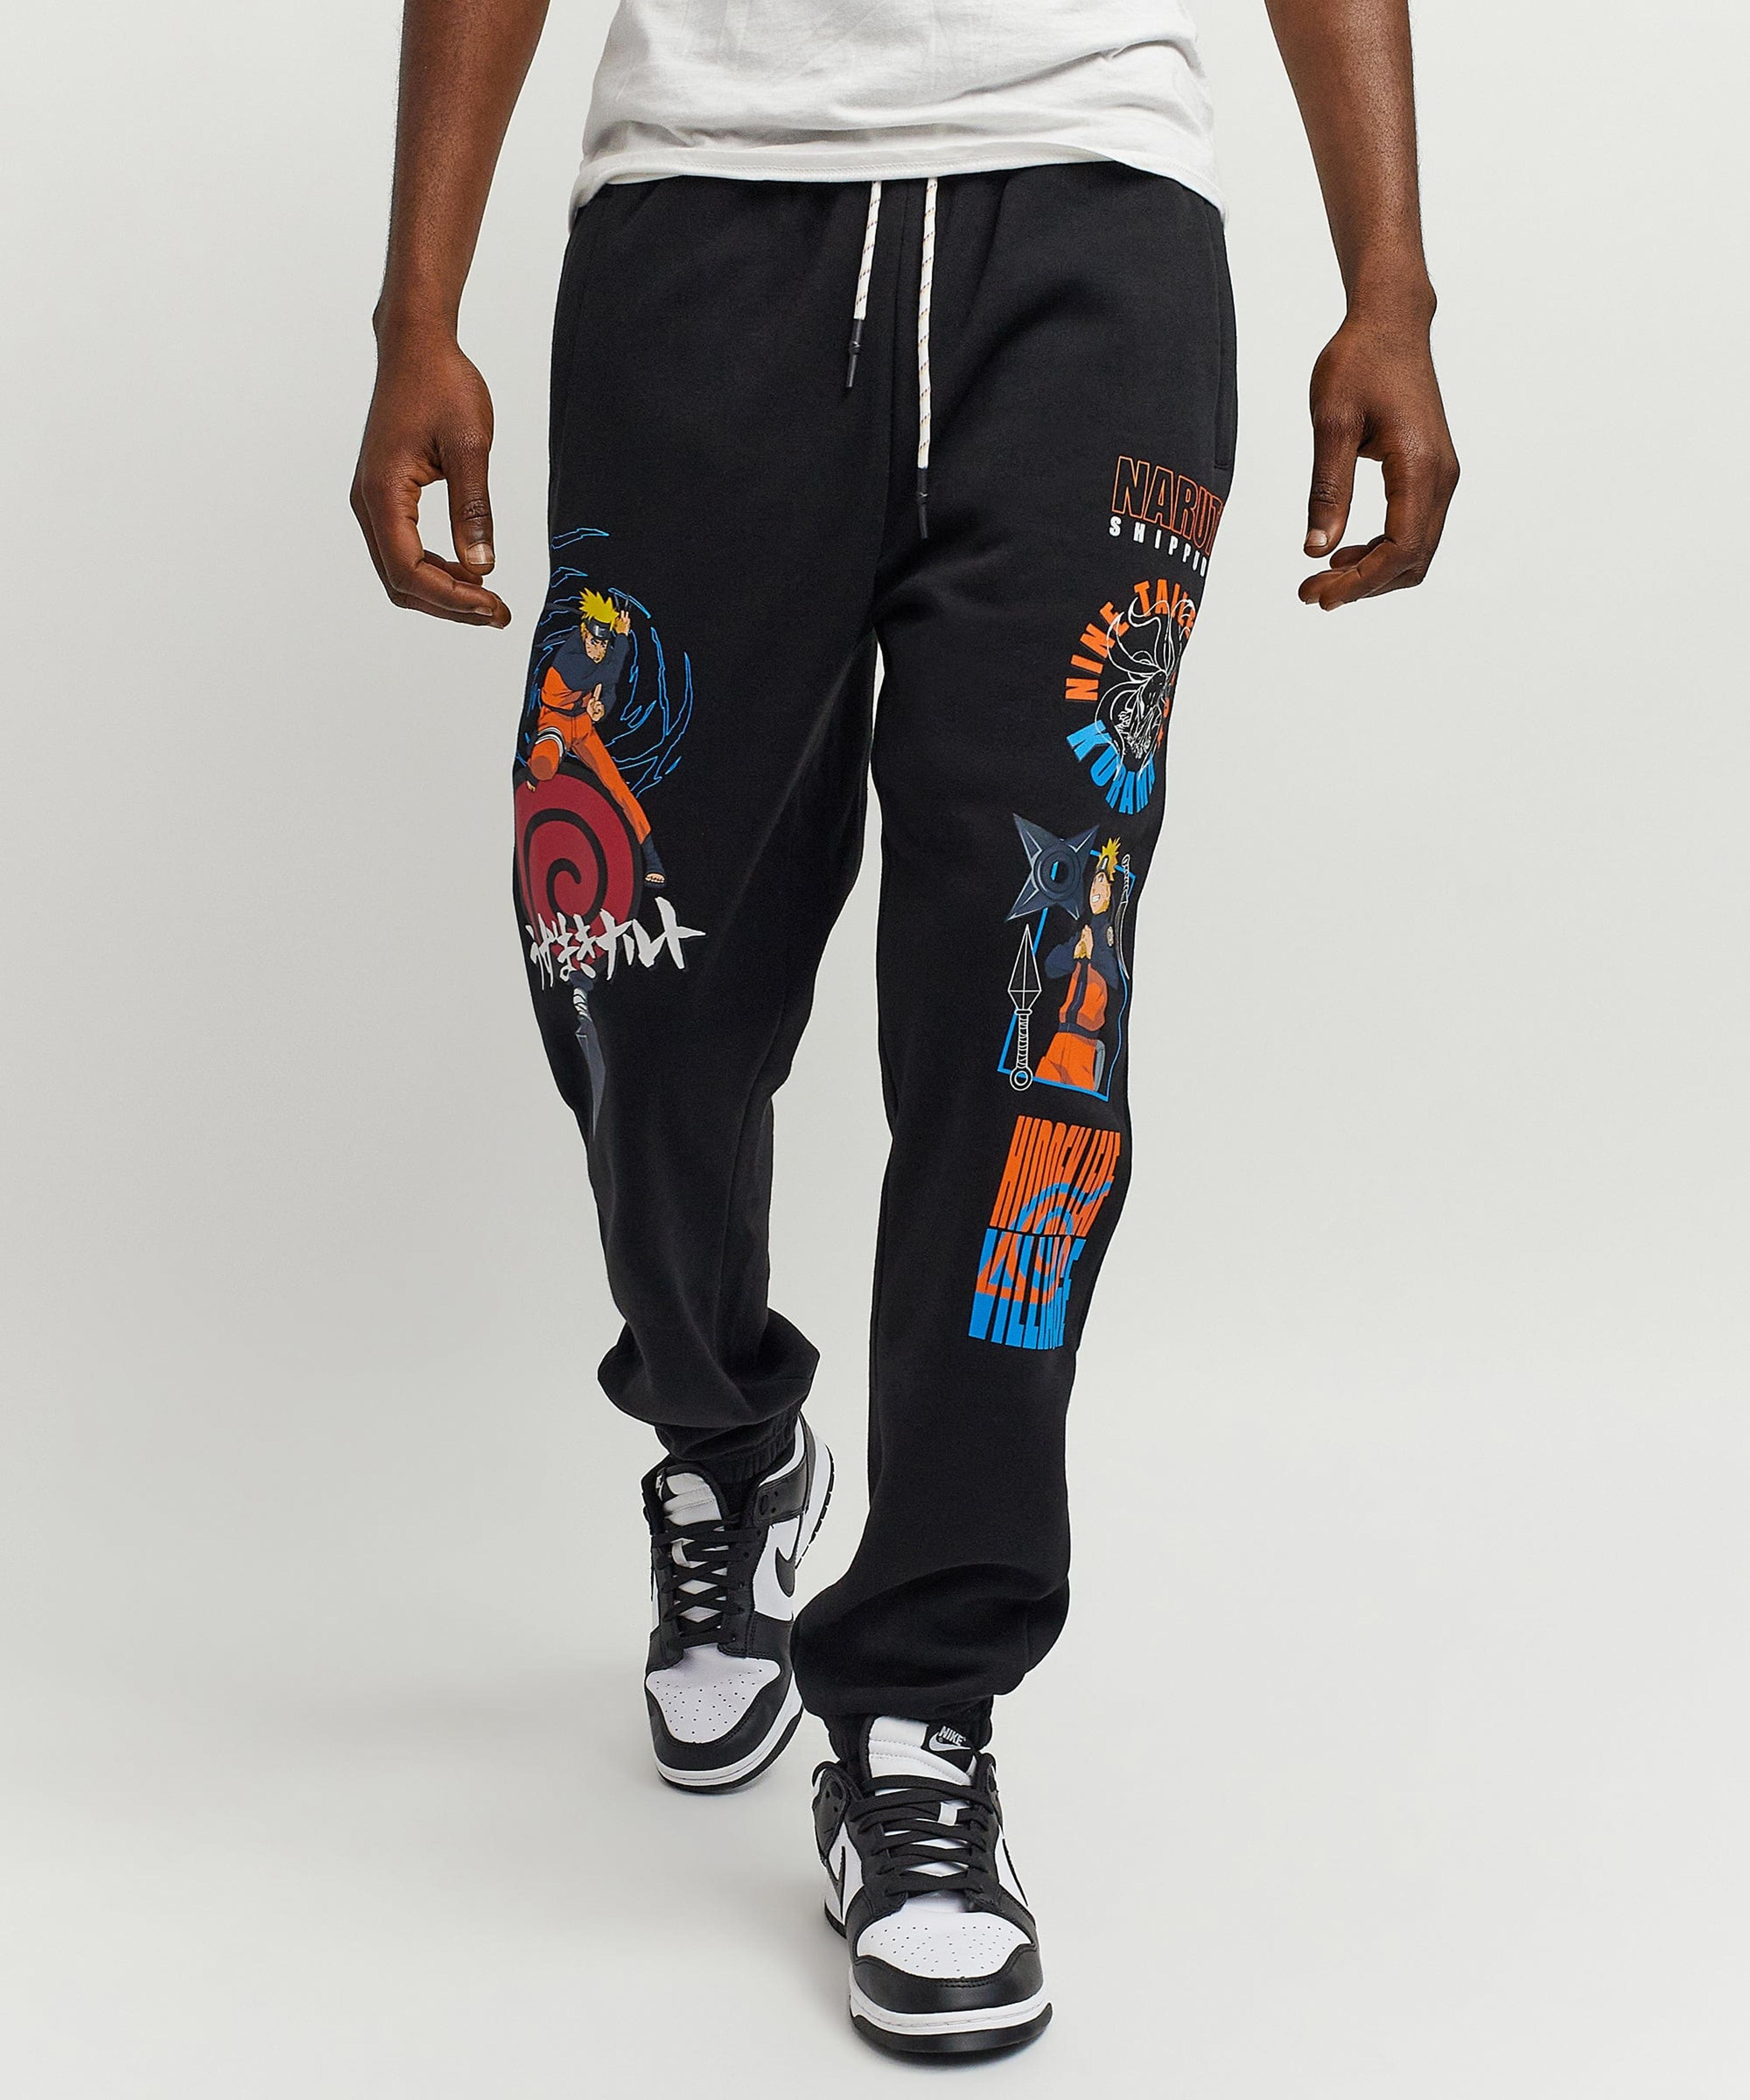 Naruto Placement Joggers